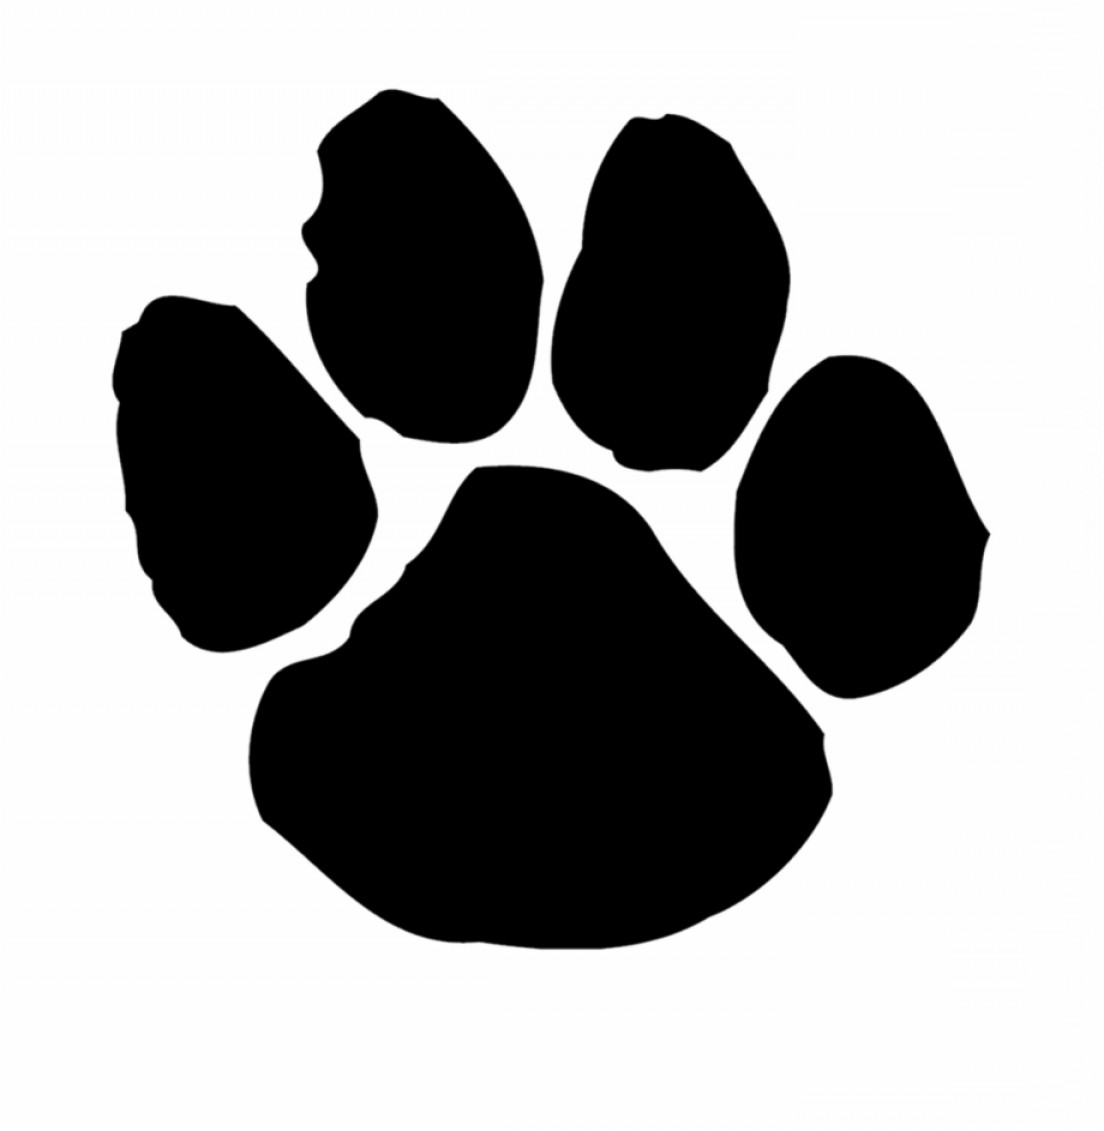 Download Free Clemson Paw Svg / Tiger Paw Print Illustrations, Royalty-Free Vector ... - Clemson paw ...